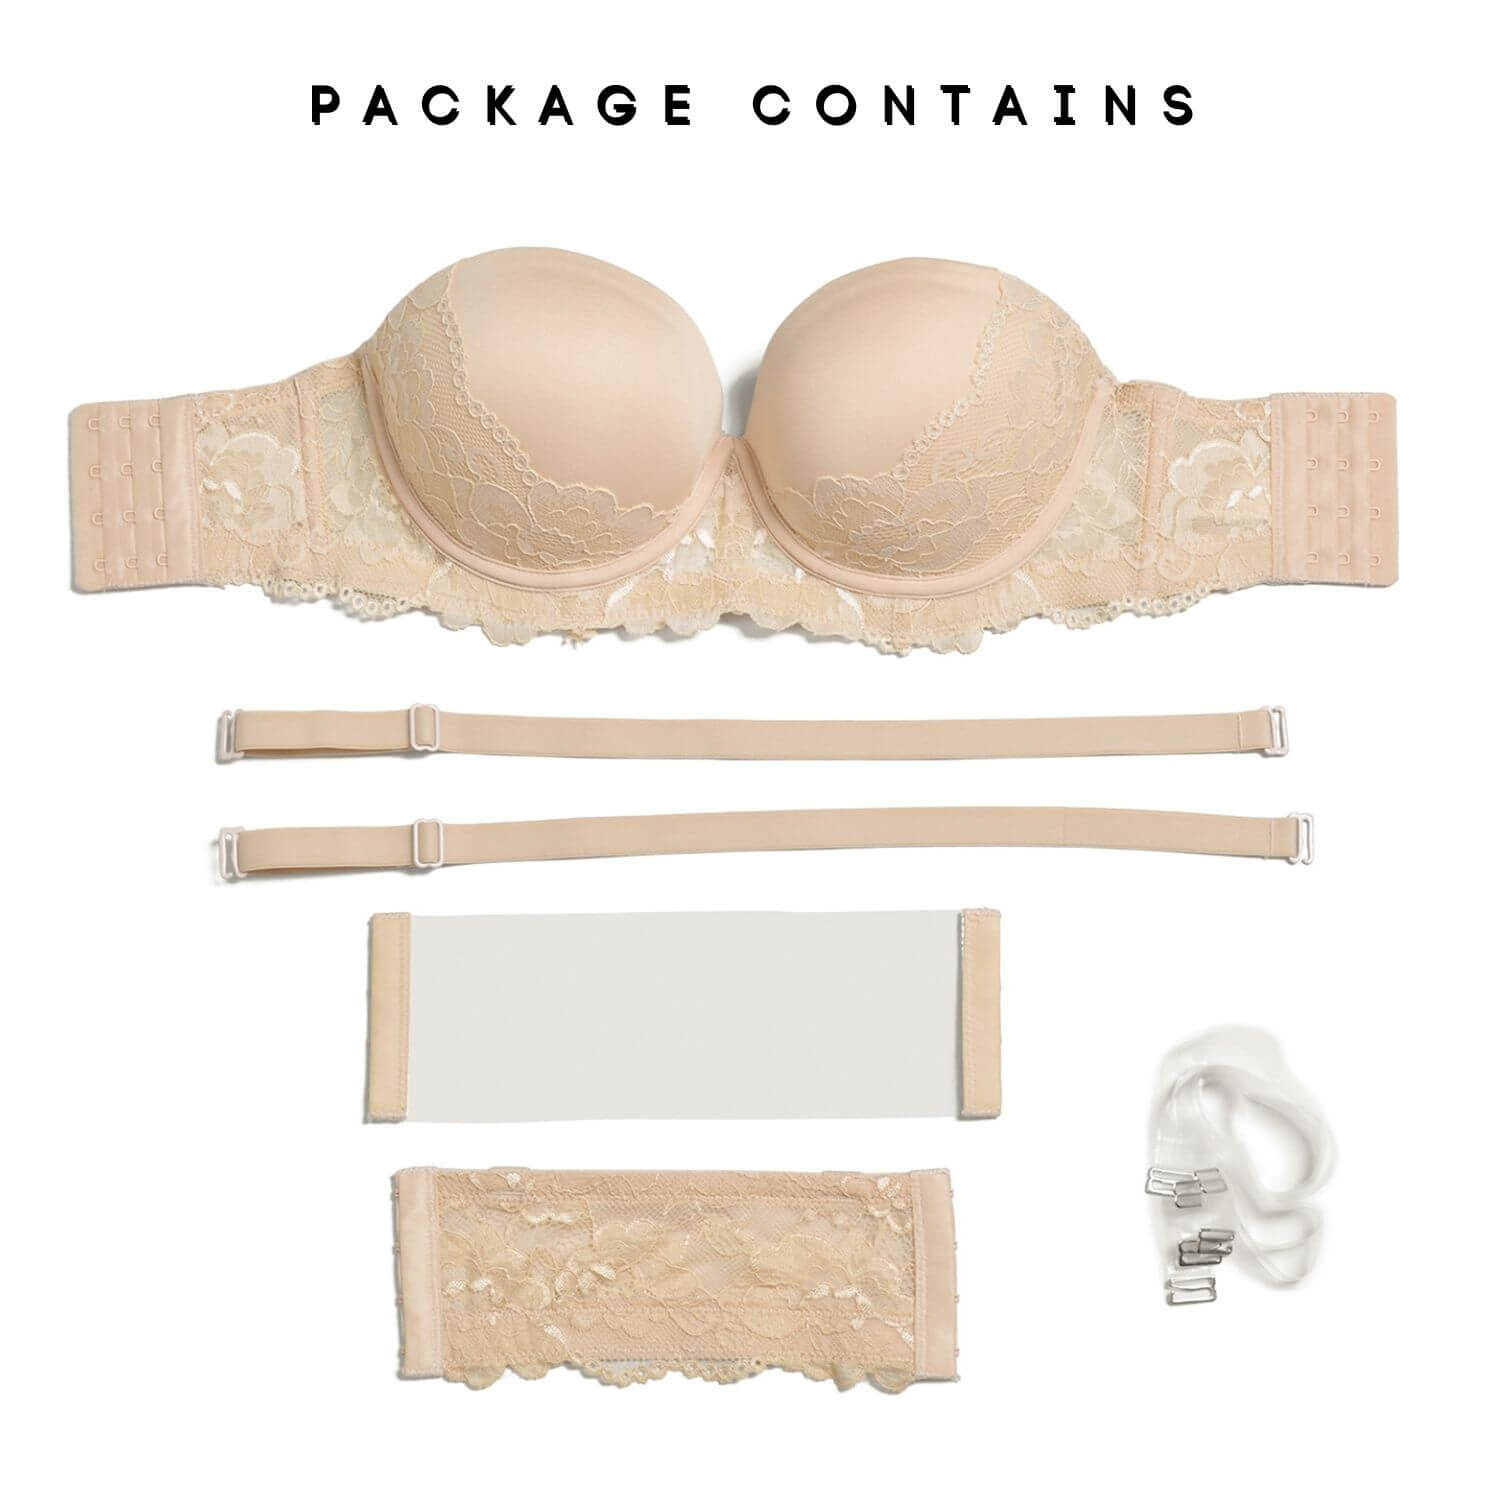    strapless-backless push up lace bra package contains